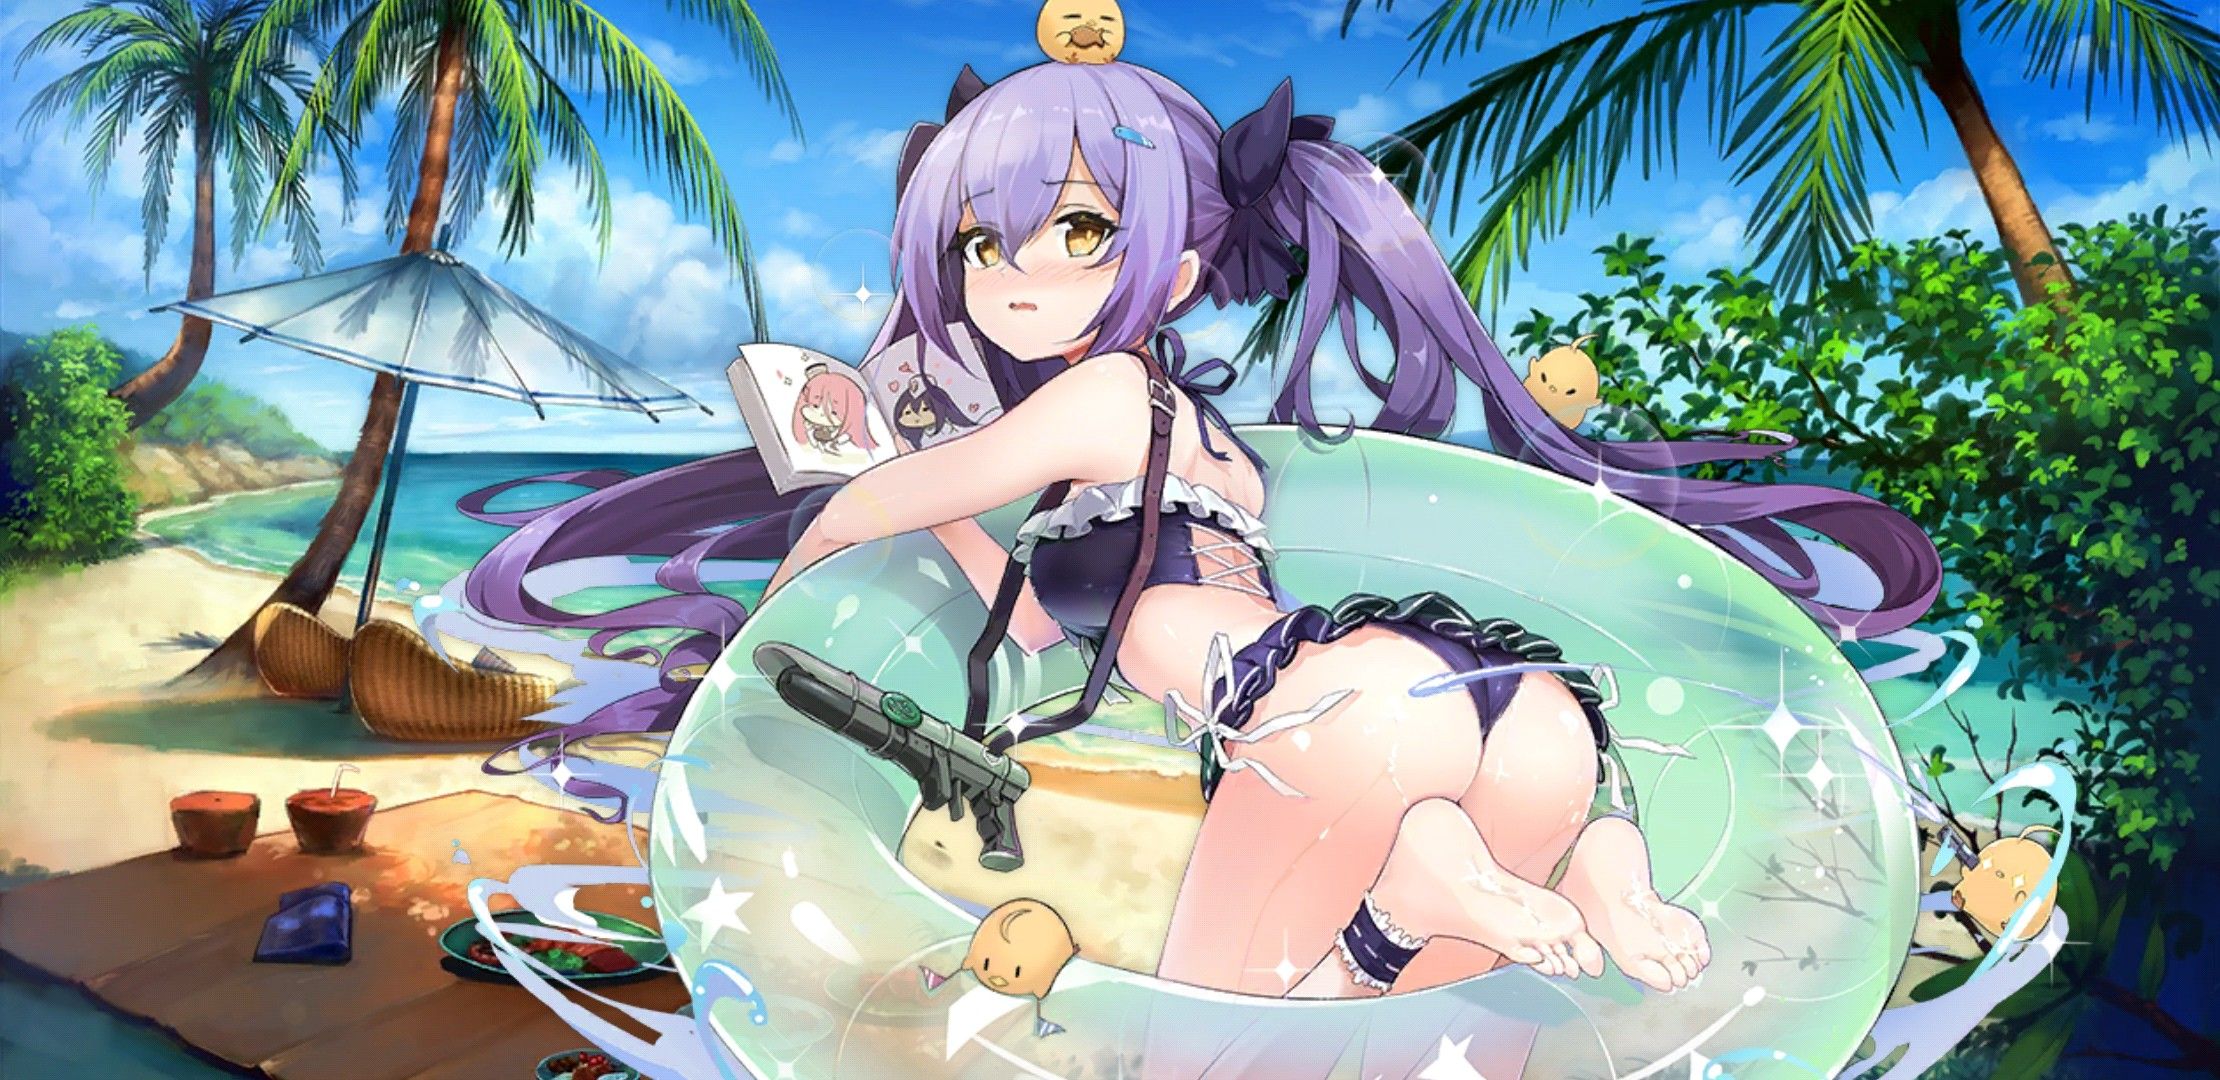 【There is an image】 Smartphone that urges charging with erotic swimsuits is malicious 1